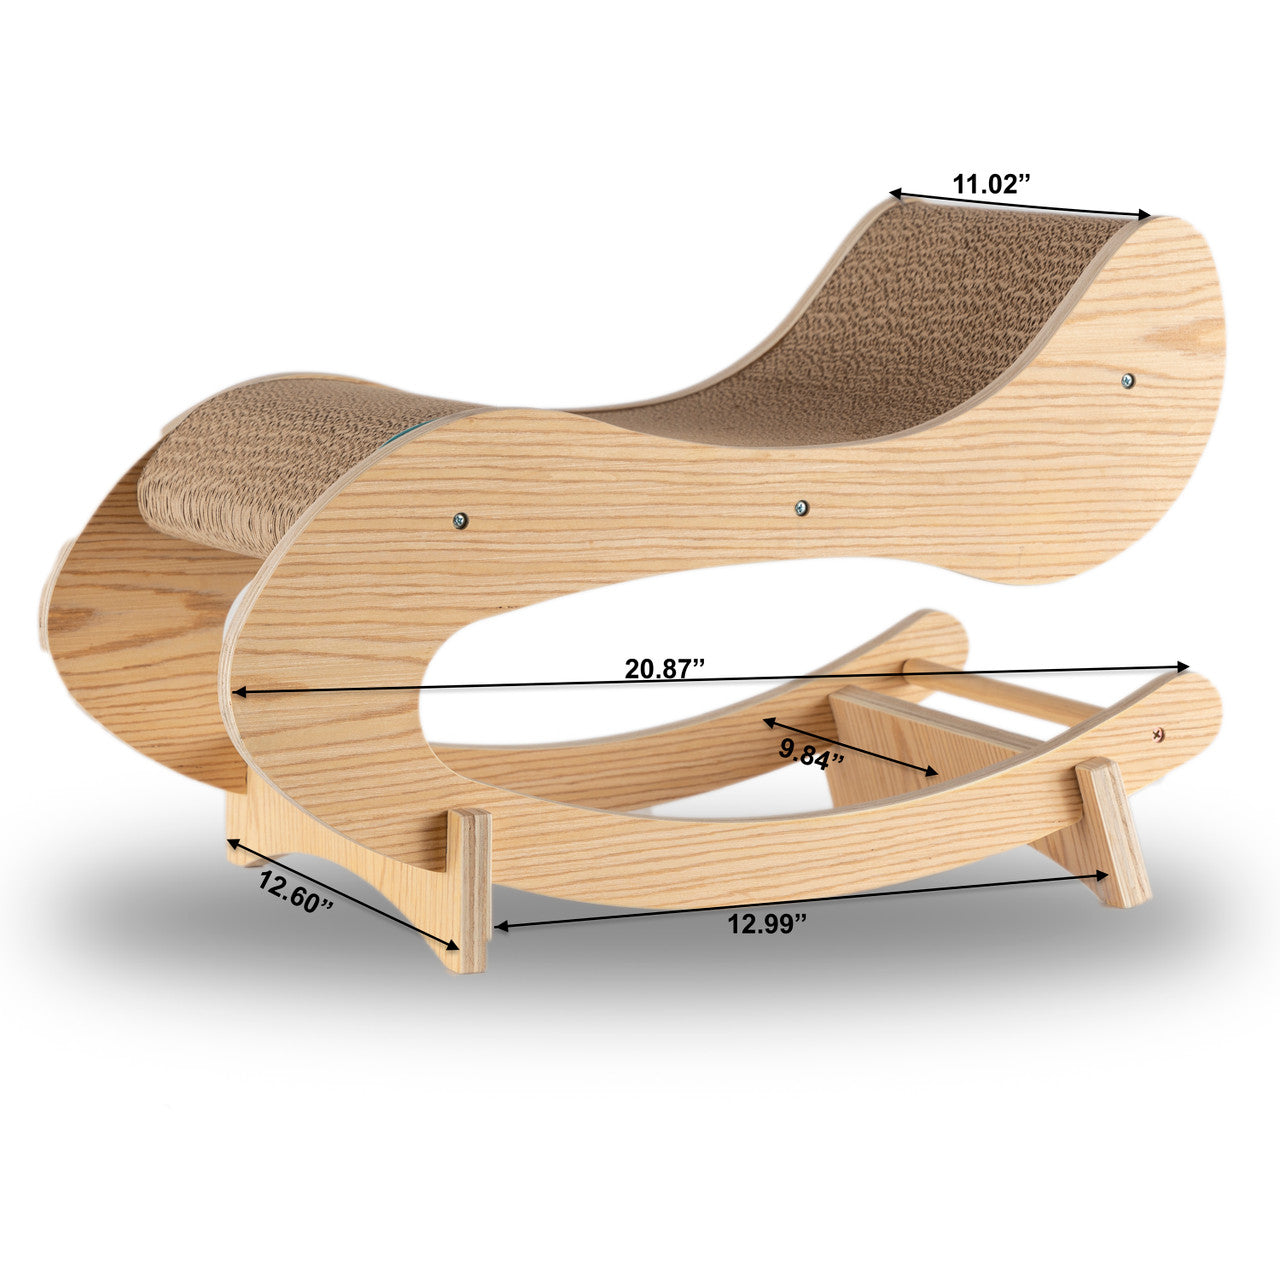 Wooden Rocking Chair For Cats